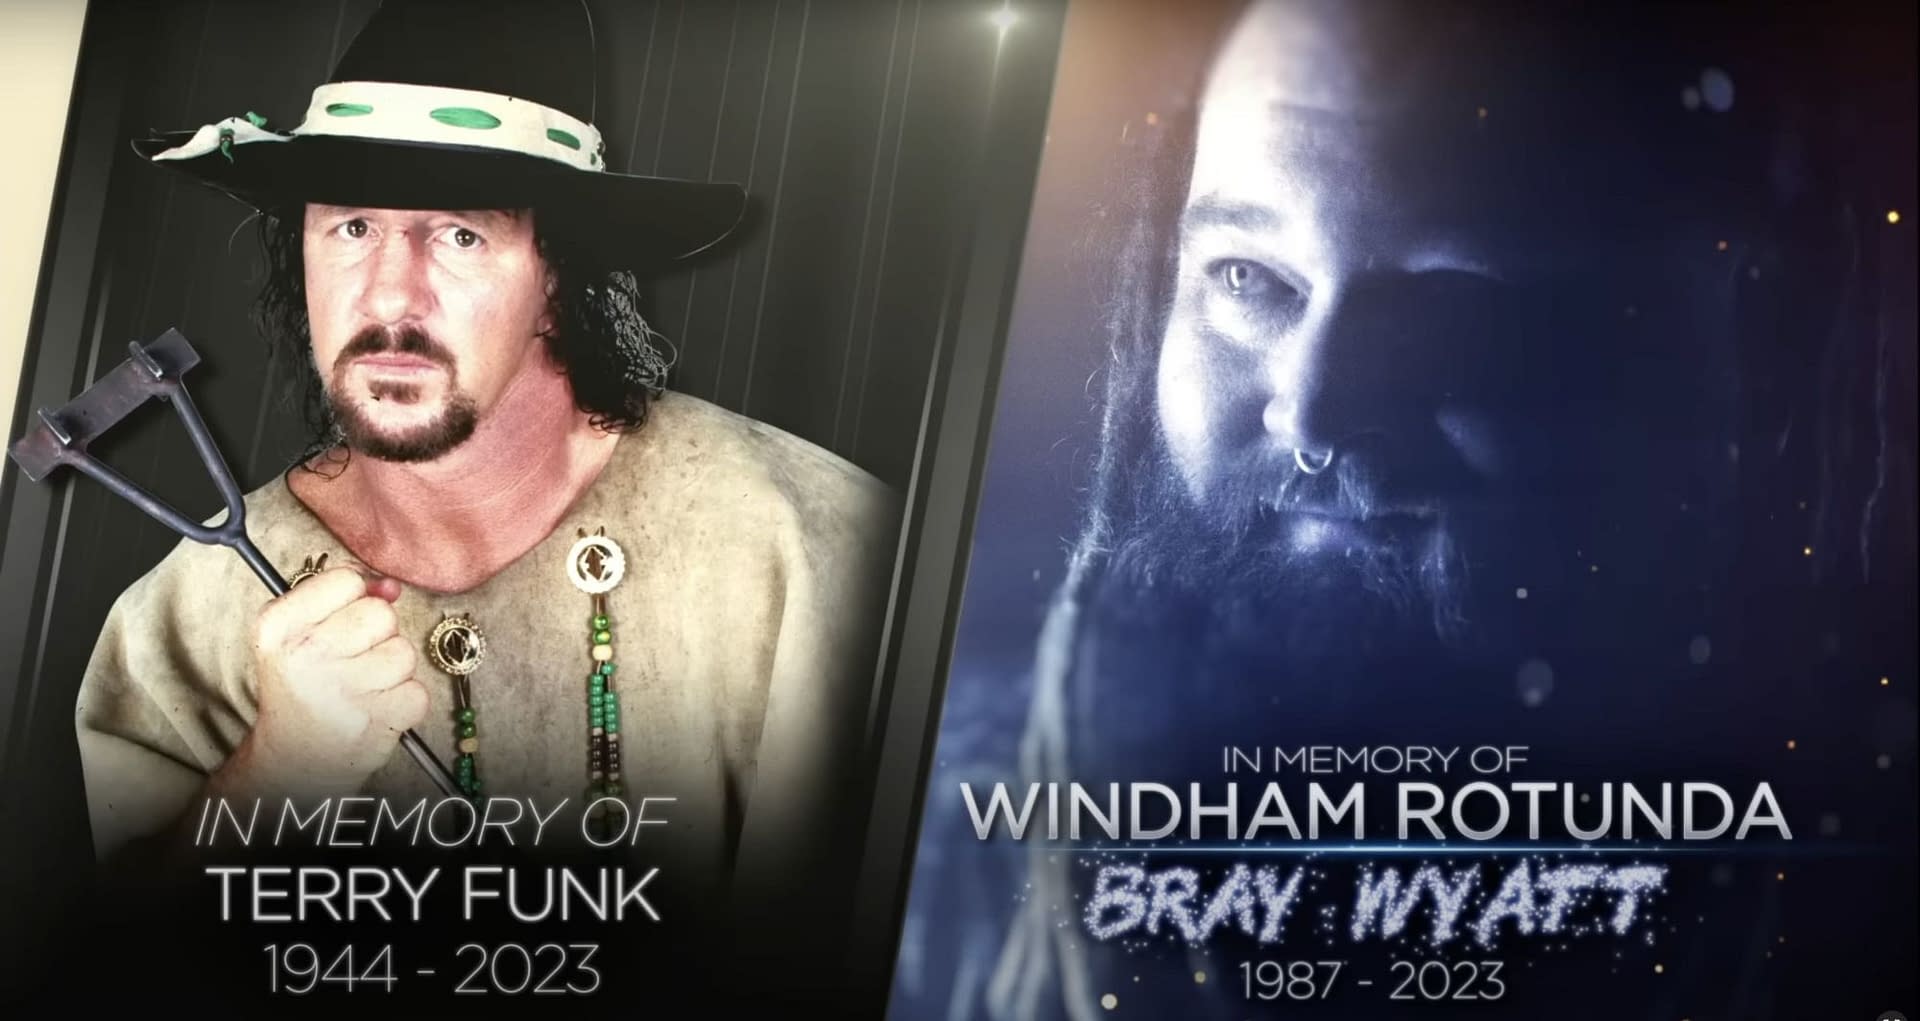 WWE SmackDown gets biggest audience in 3 years for Bray Wyatt